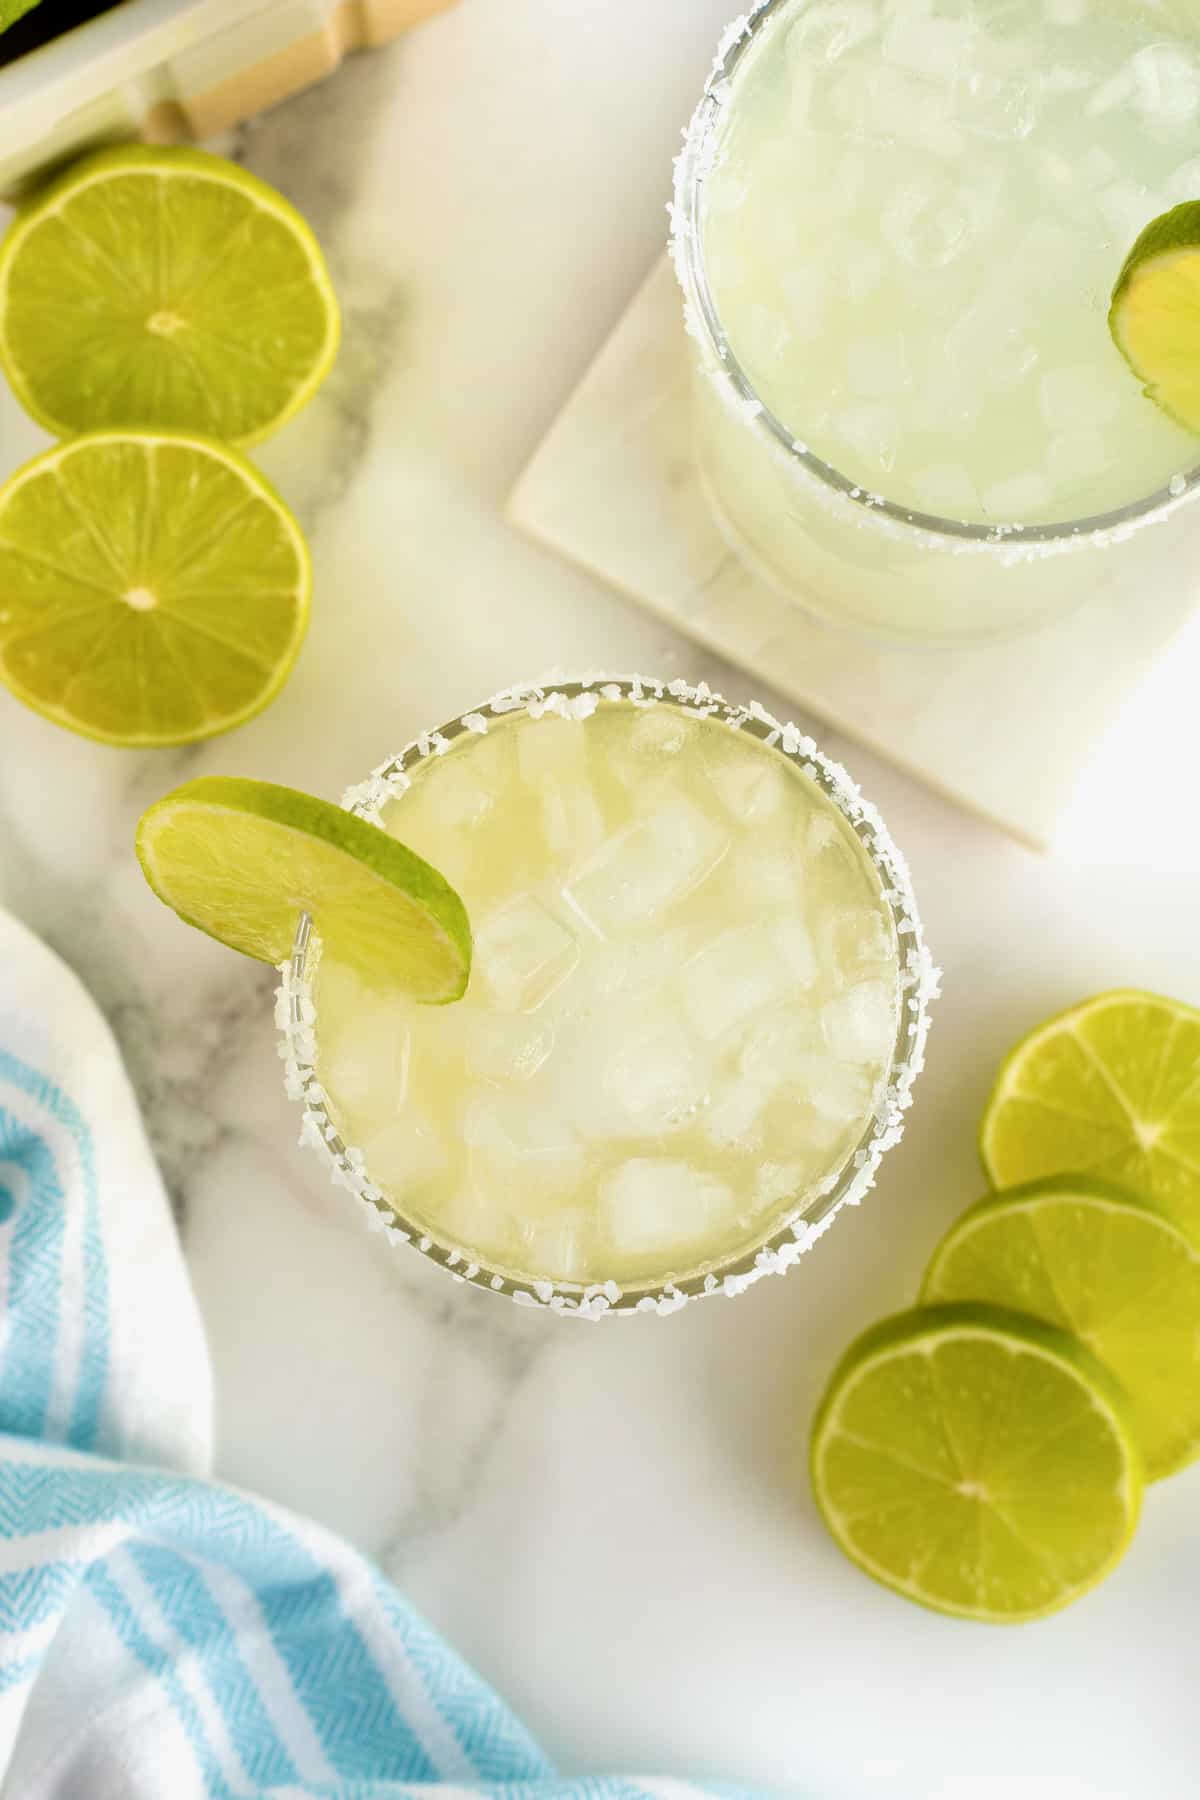 A salt rimmed glass filled with margarita. There is a lime wedge on the rim of the glass and lime slices scattered around.